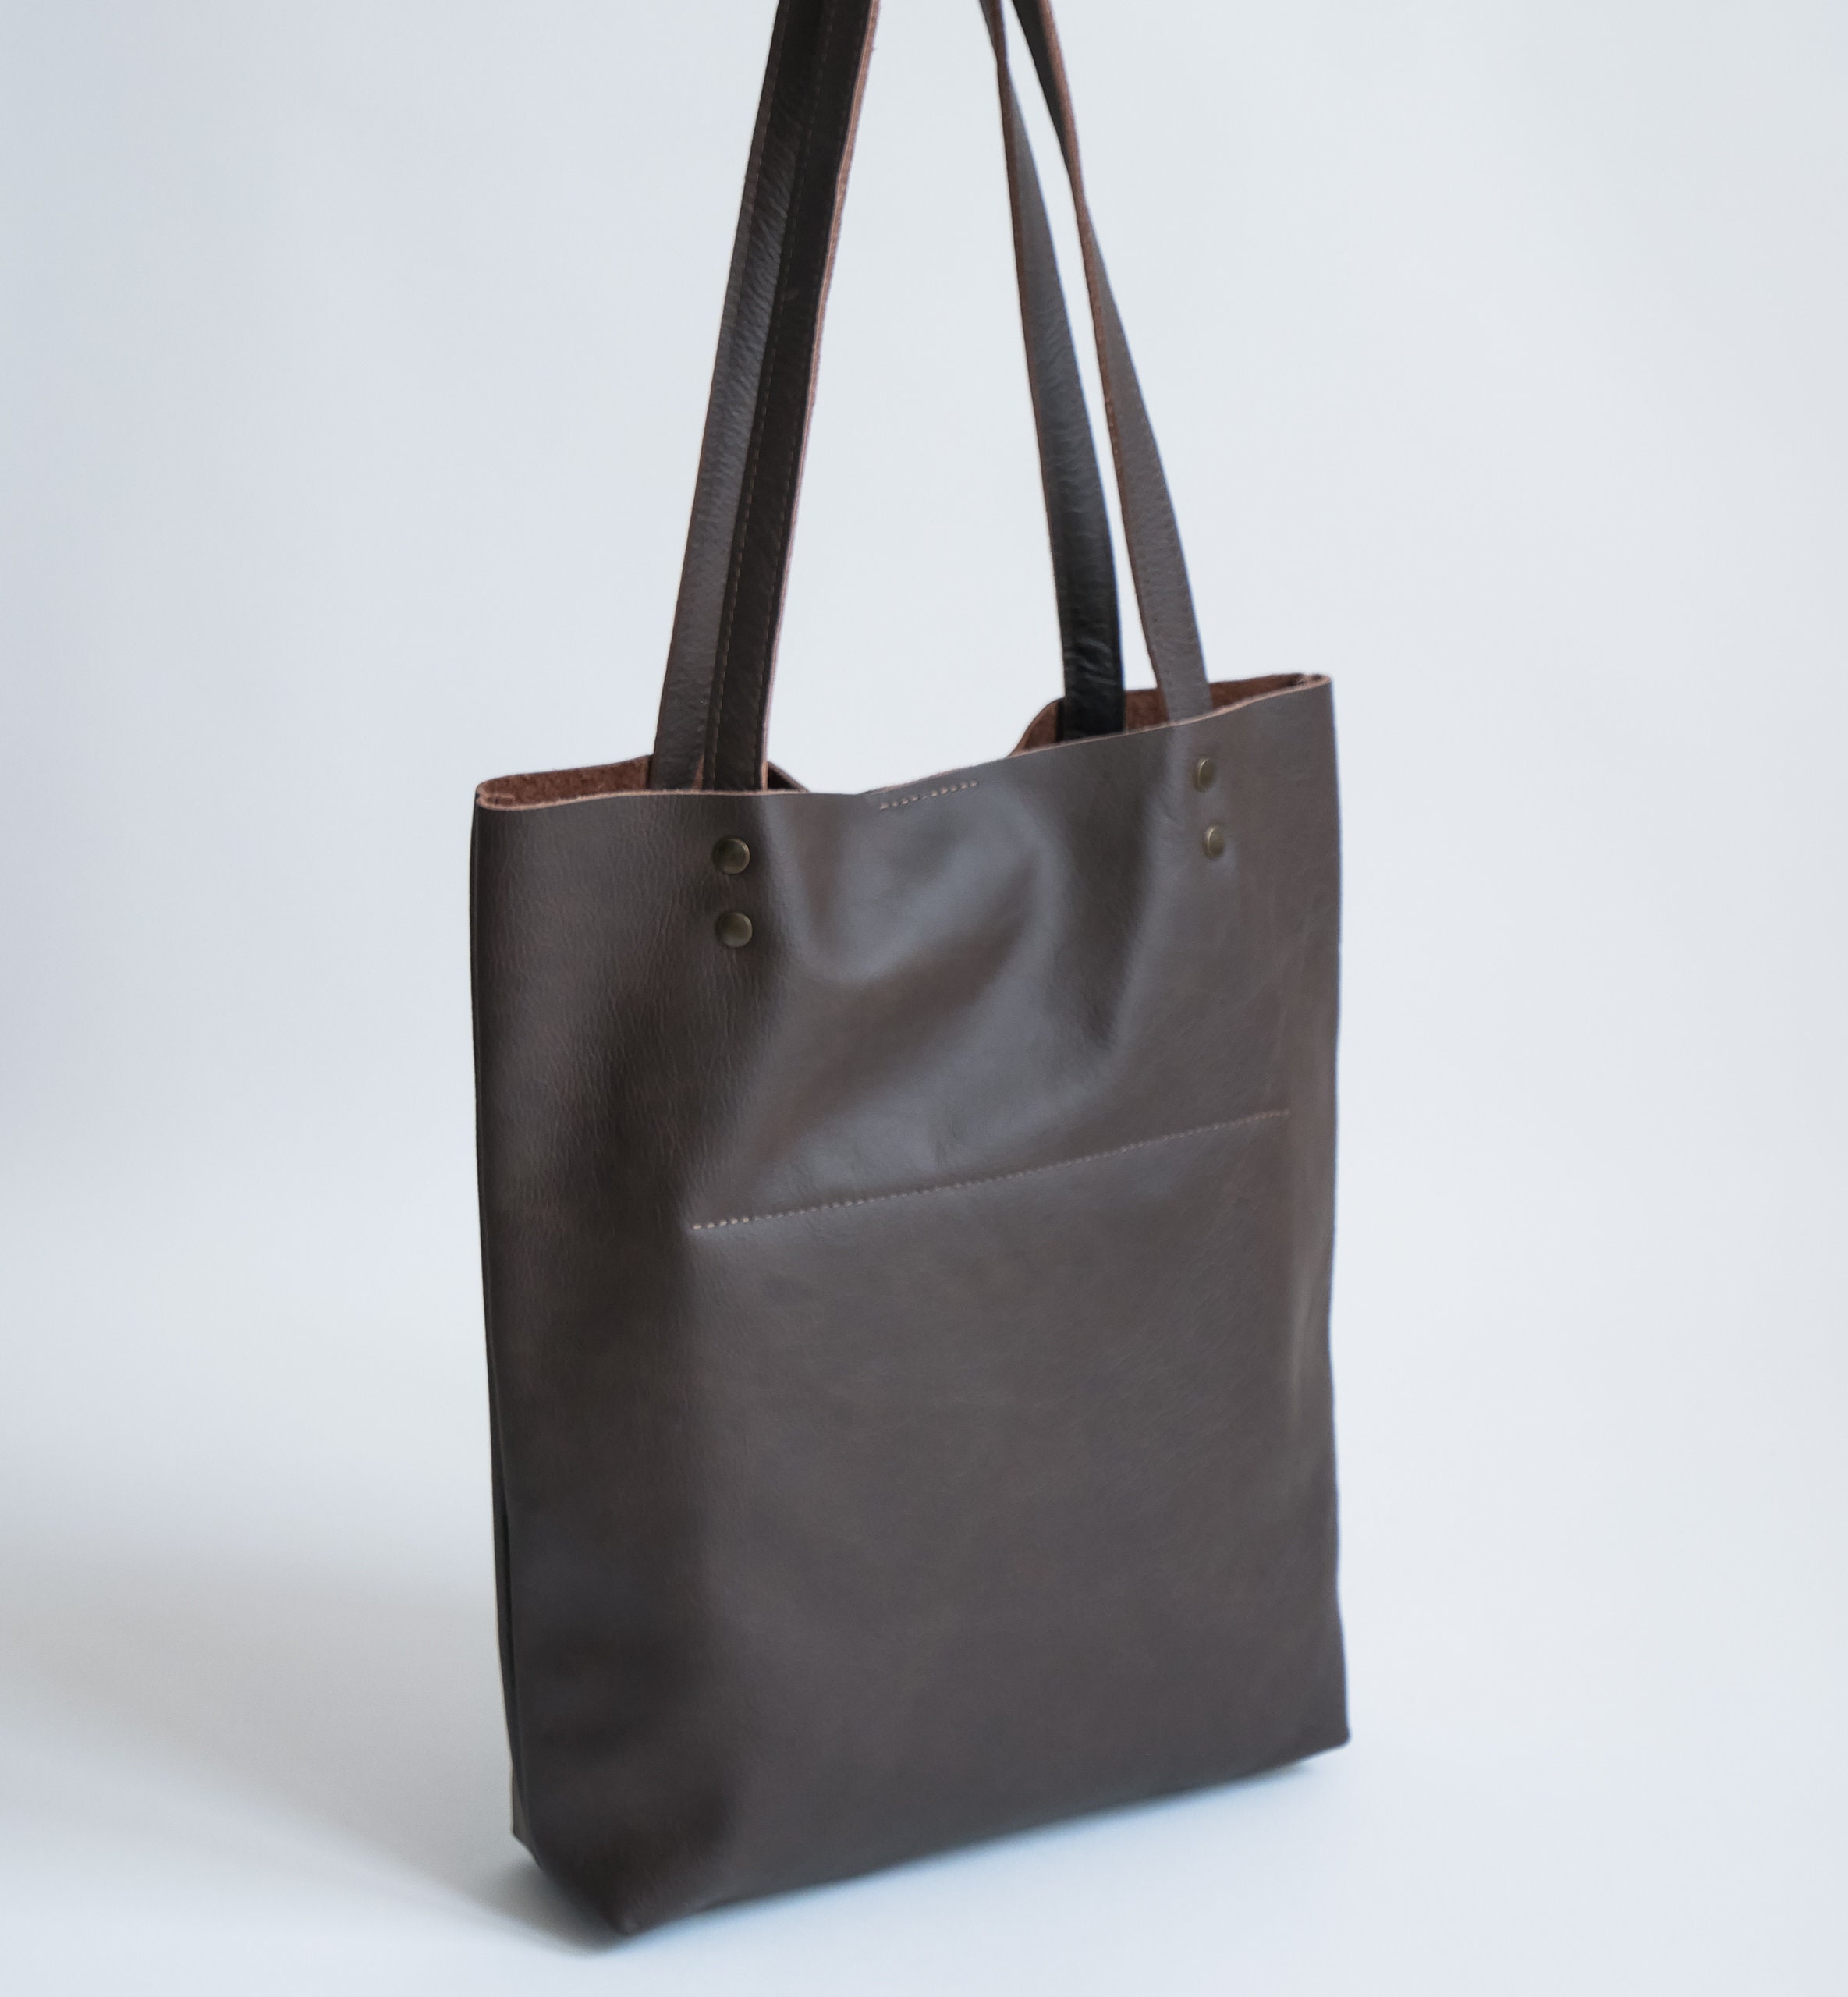 LEATHER TOTE Bag BROWN Leather Purse Natural Leather Book - Etsy